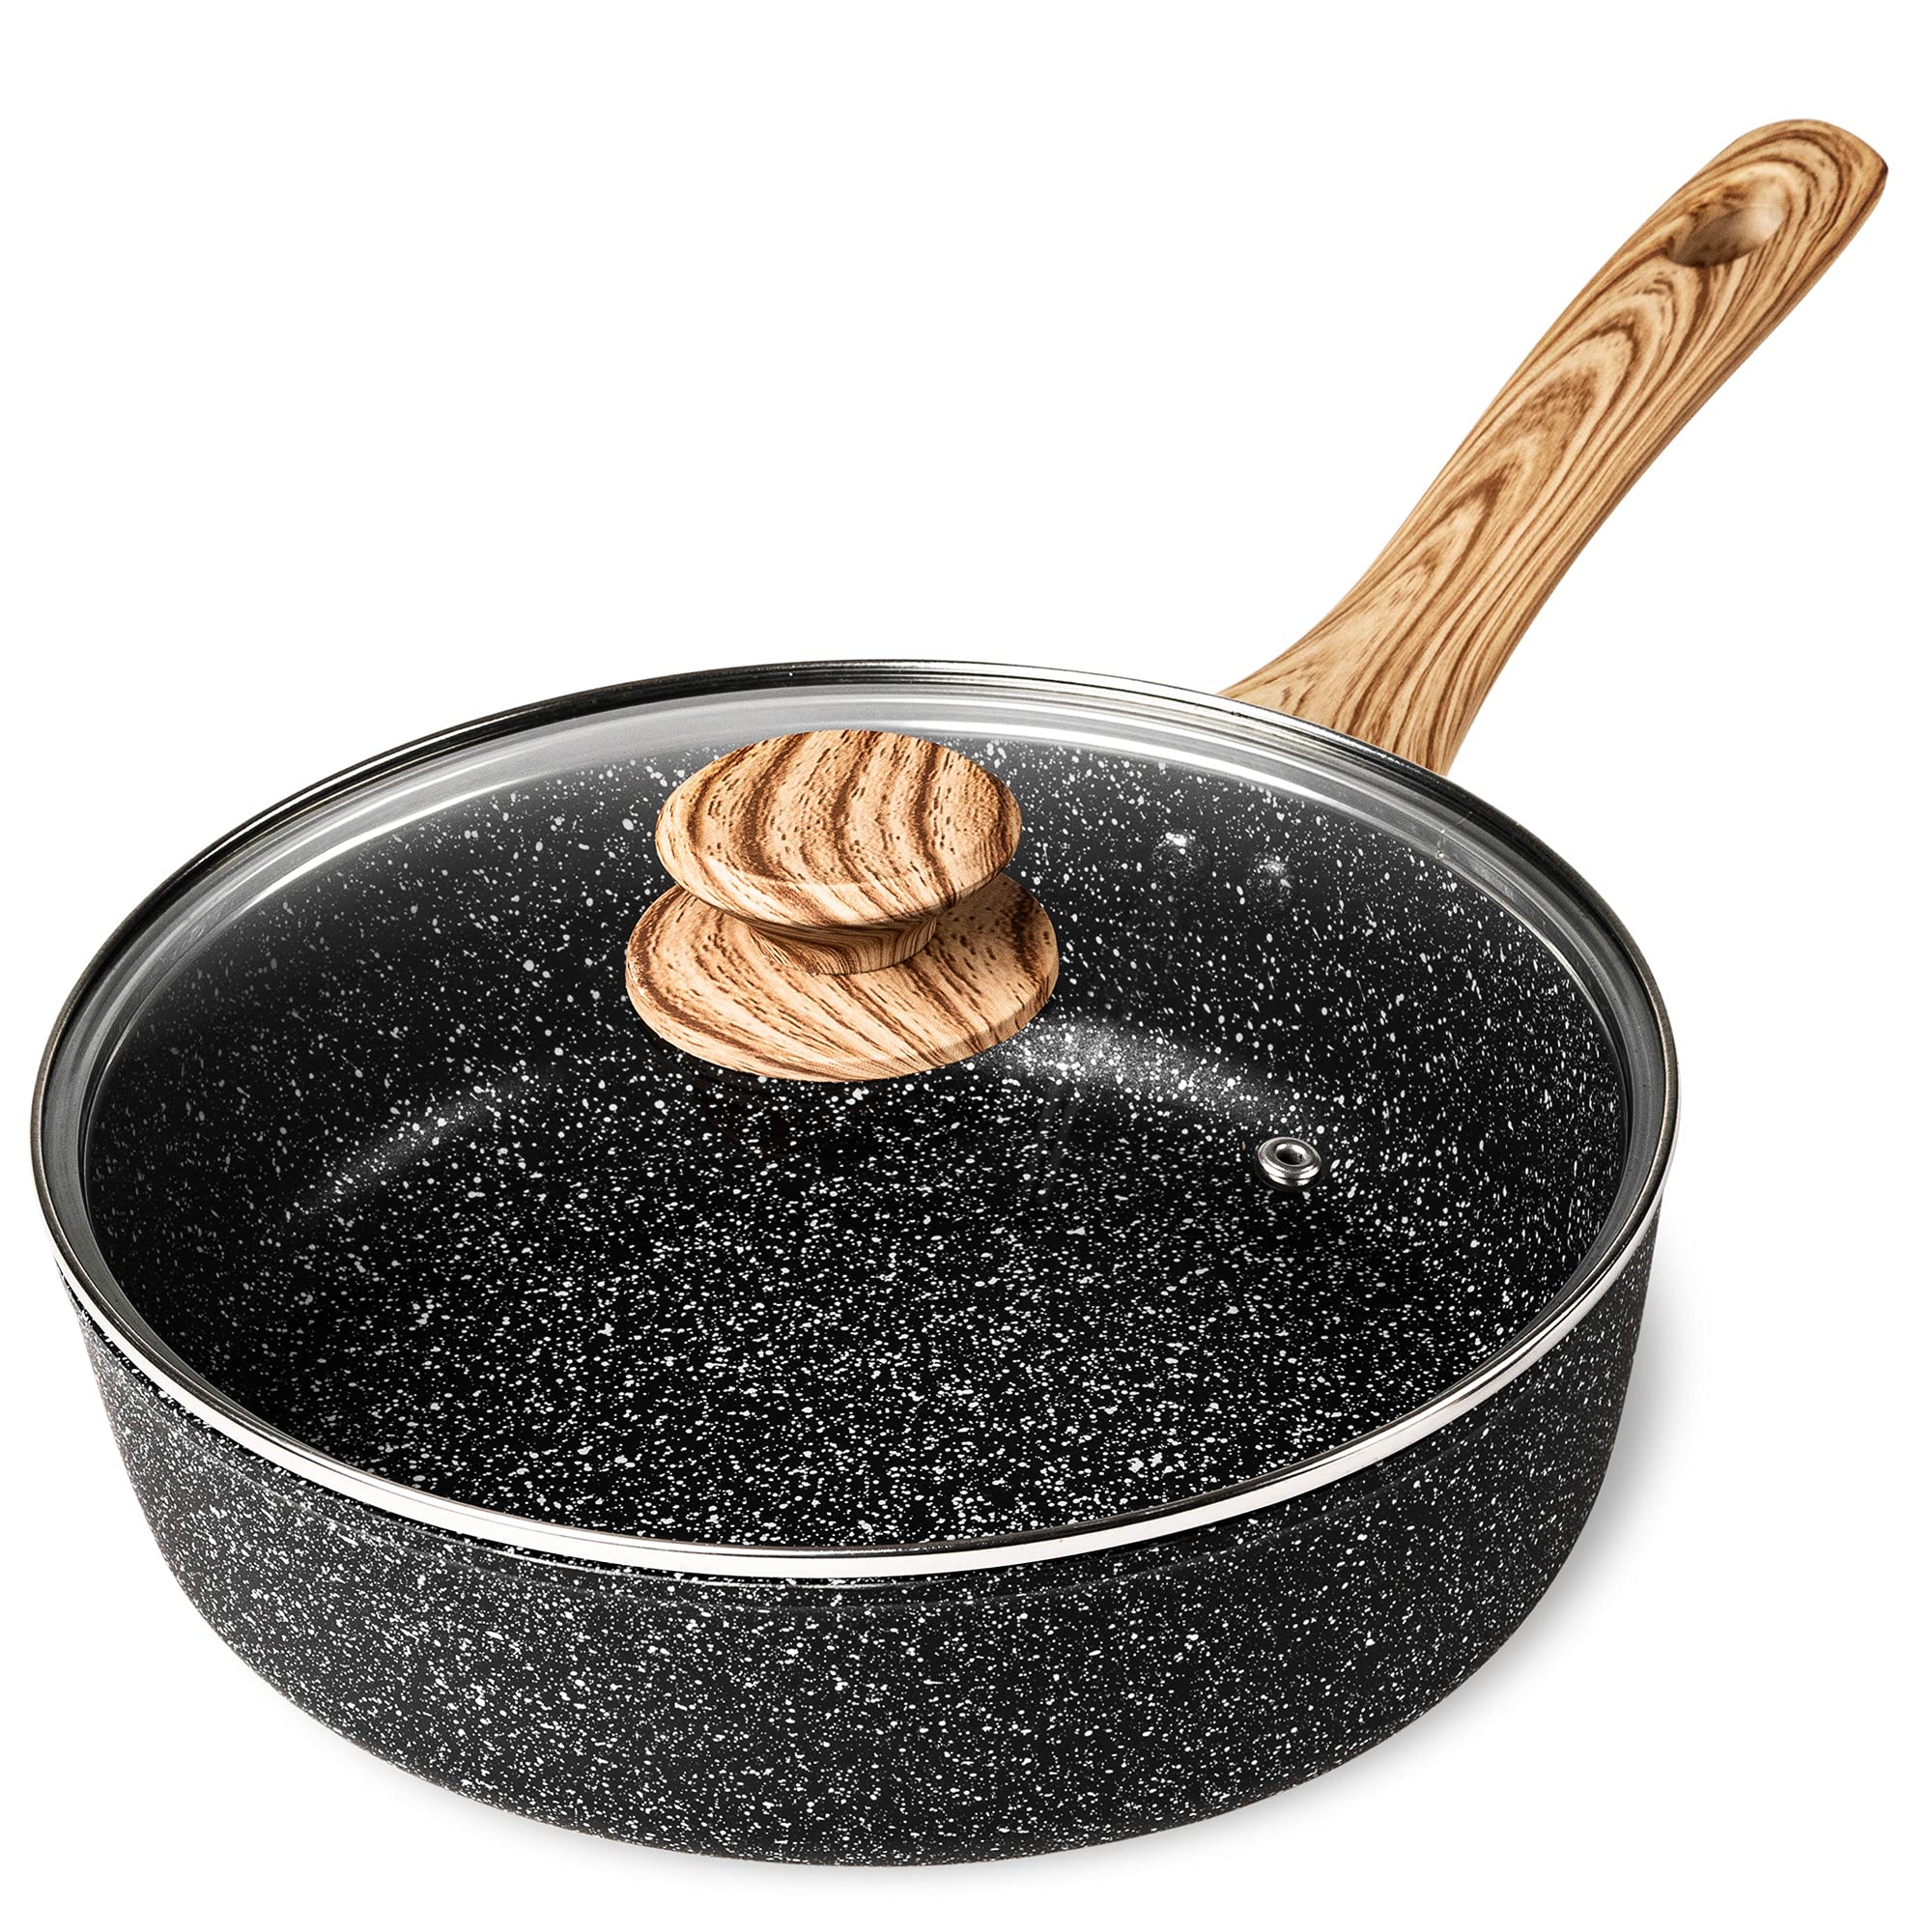 MICHELANGELO Saute Pan with Lid, 11 Inch Deep Frying Pans Nonstick with Lid, Nonstick Frying Pan with Granite Coating and Comfor